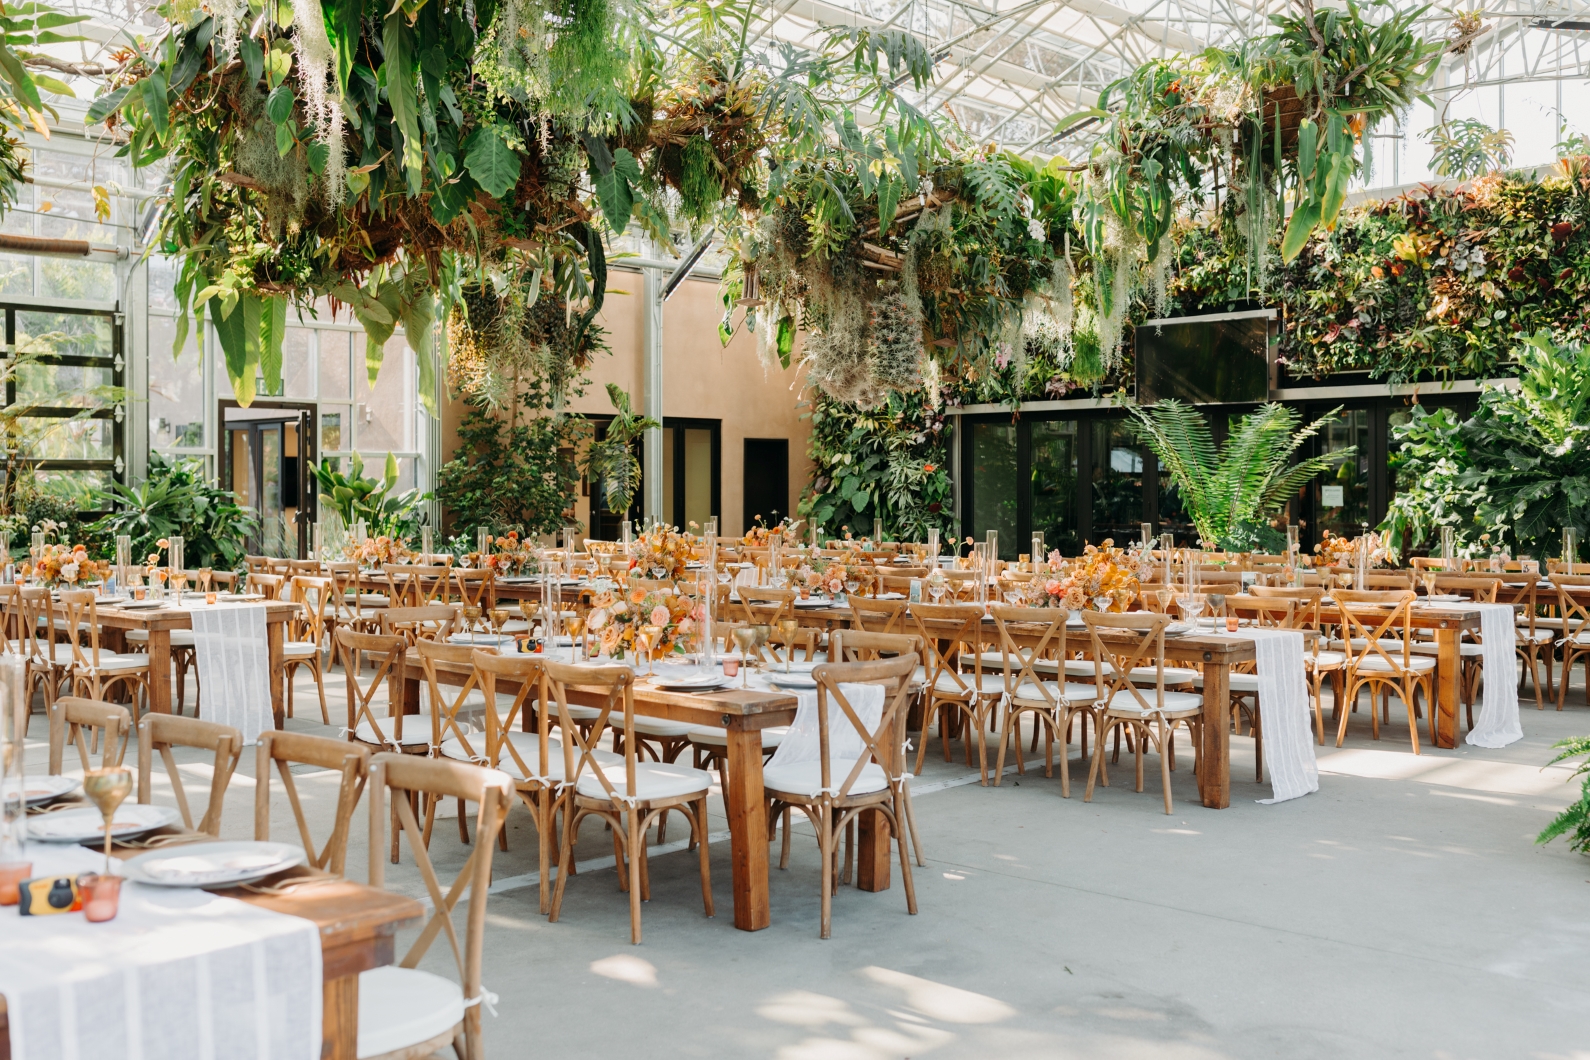 Event tables set up in greenhouse with plants hanging overhead